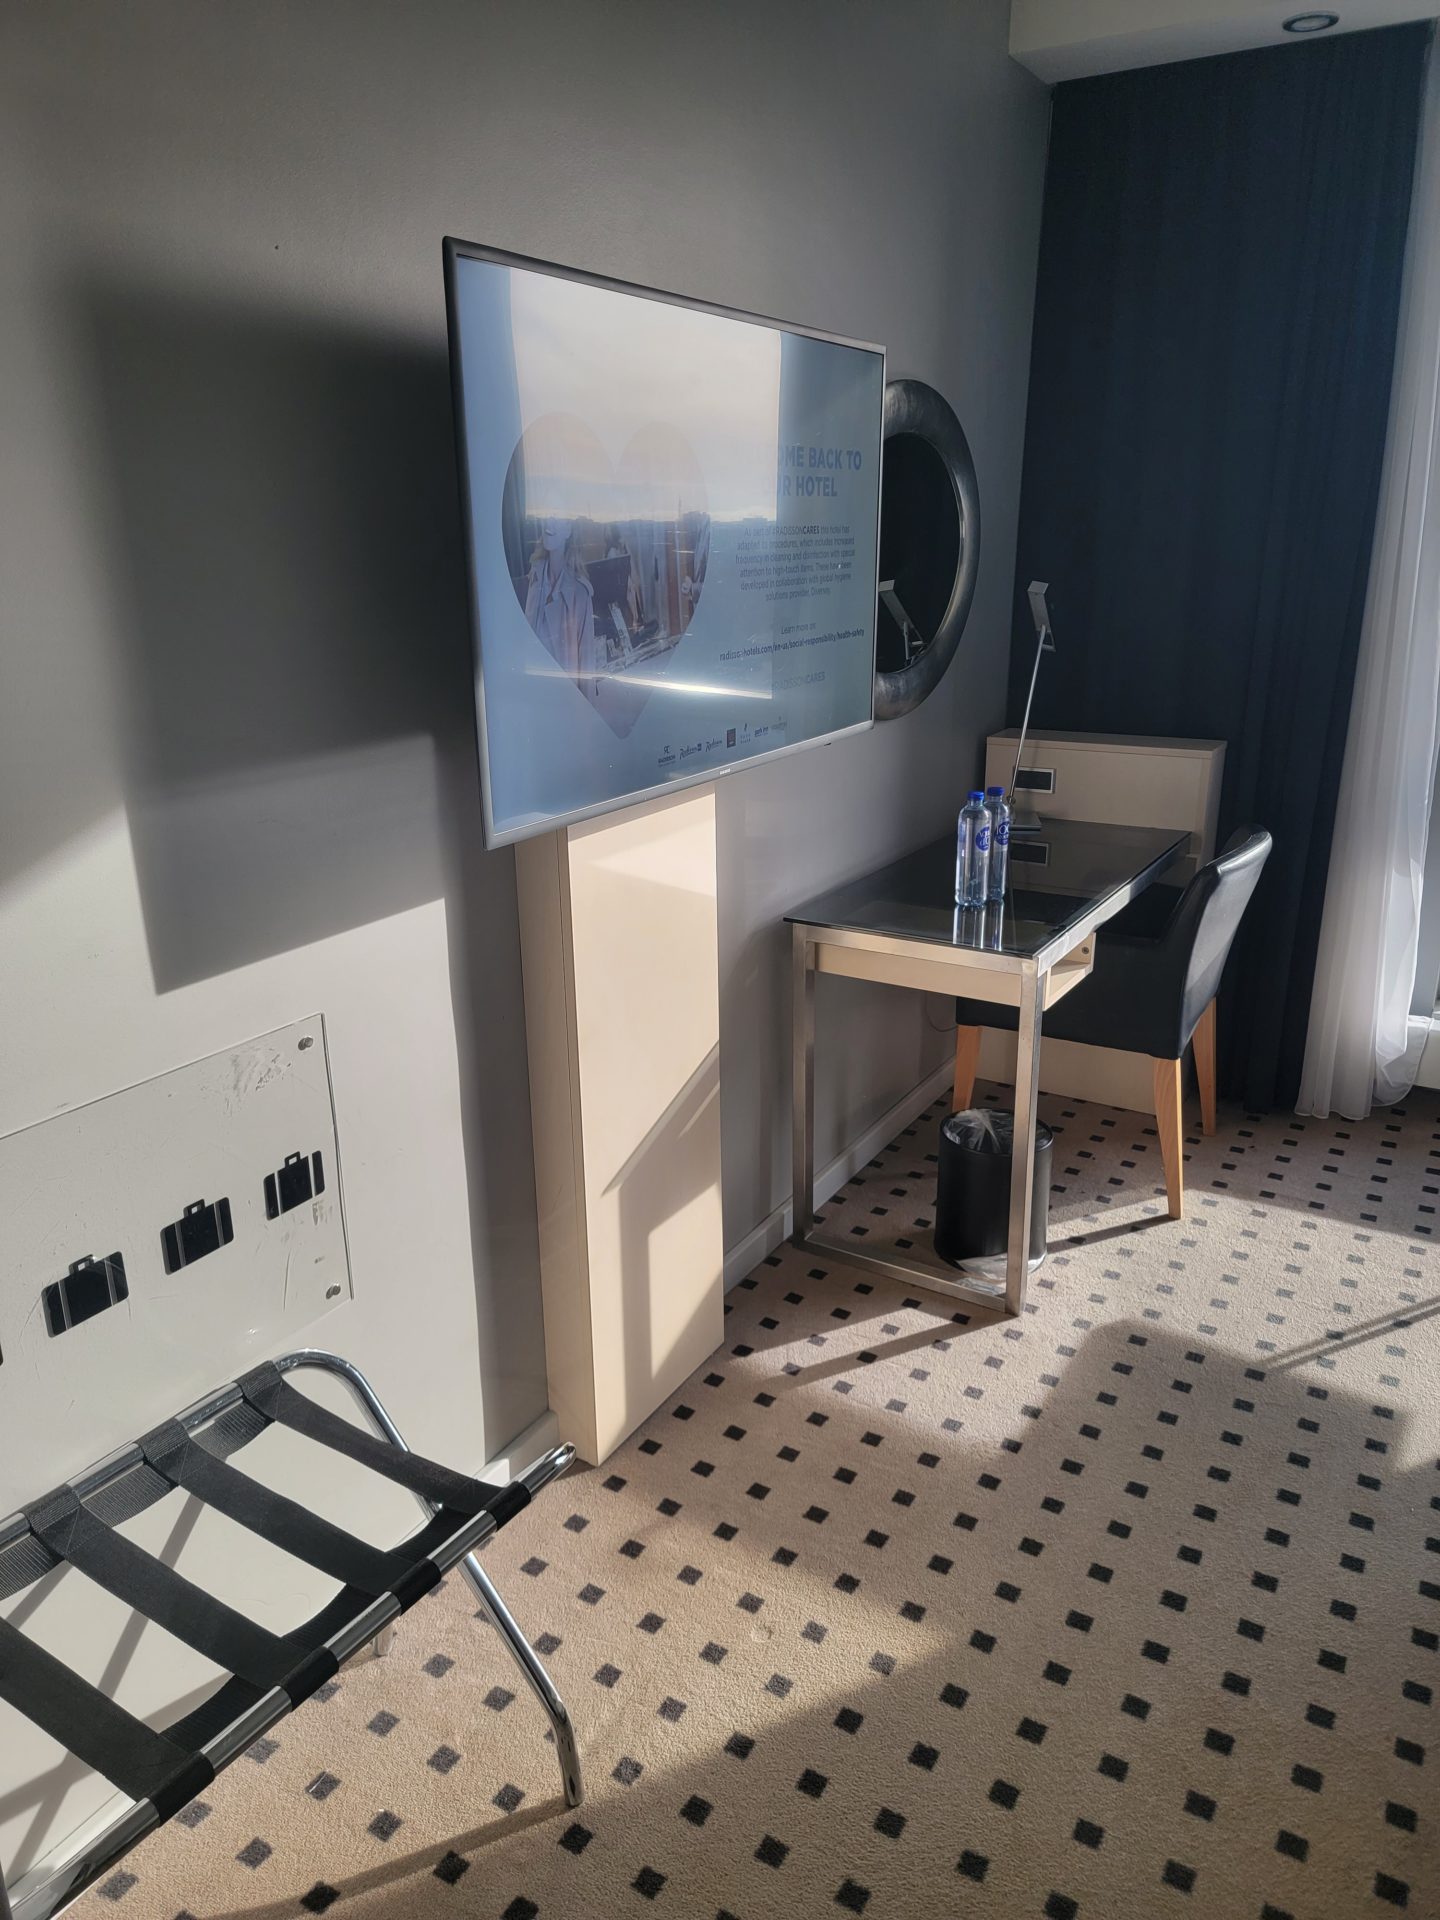 a room with a television and chair